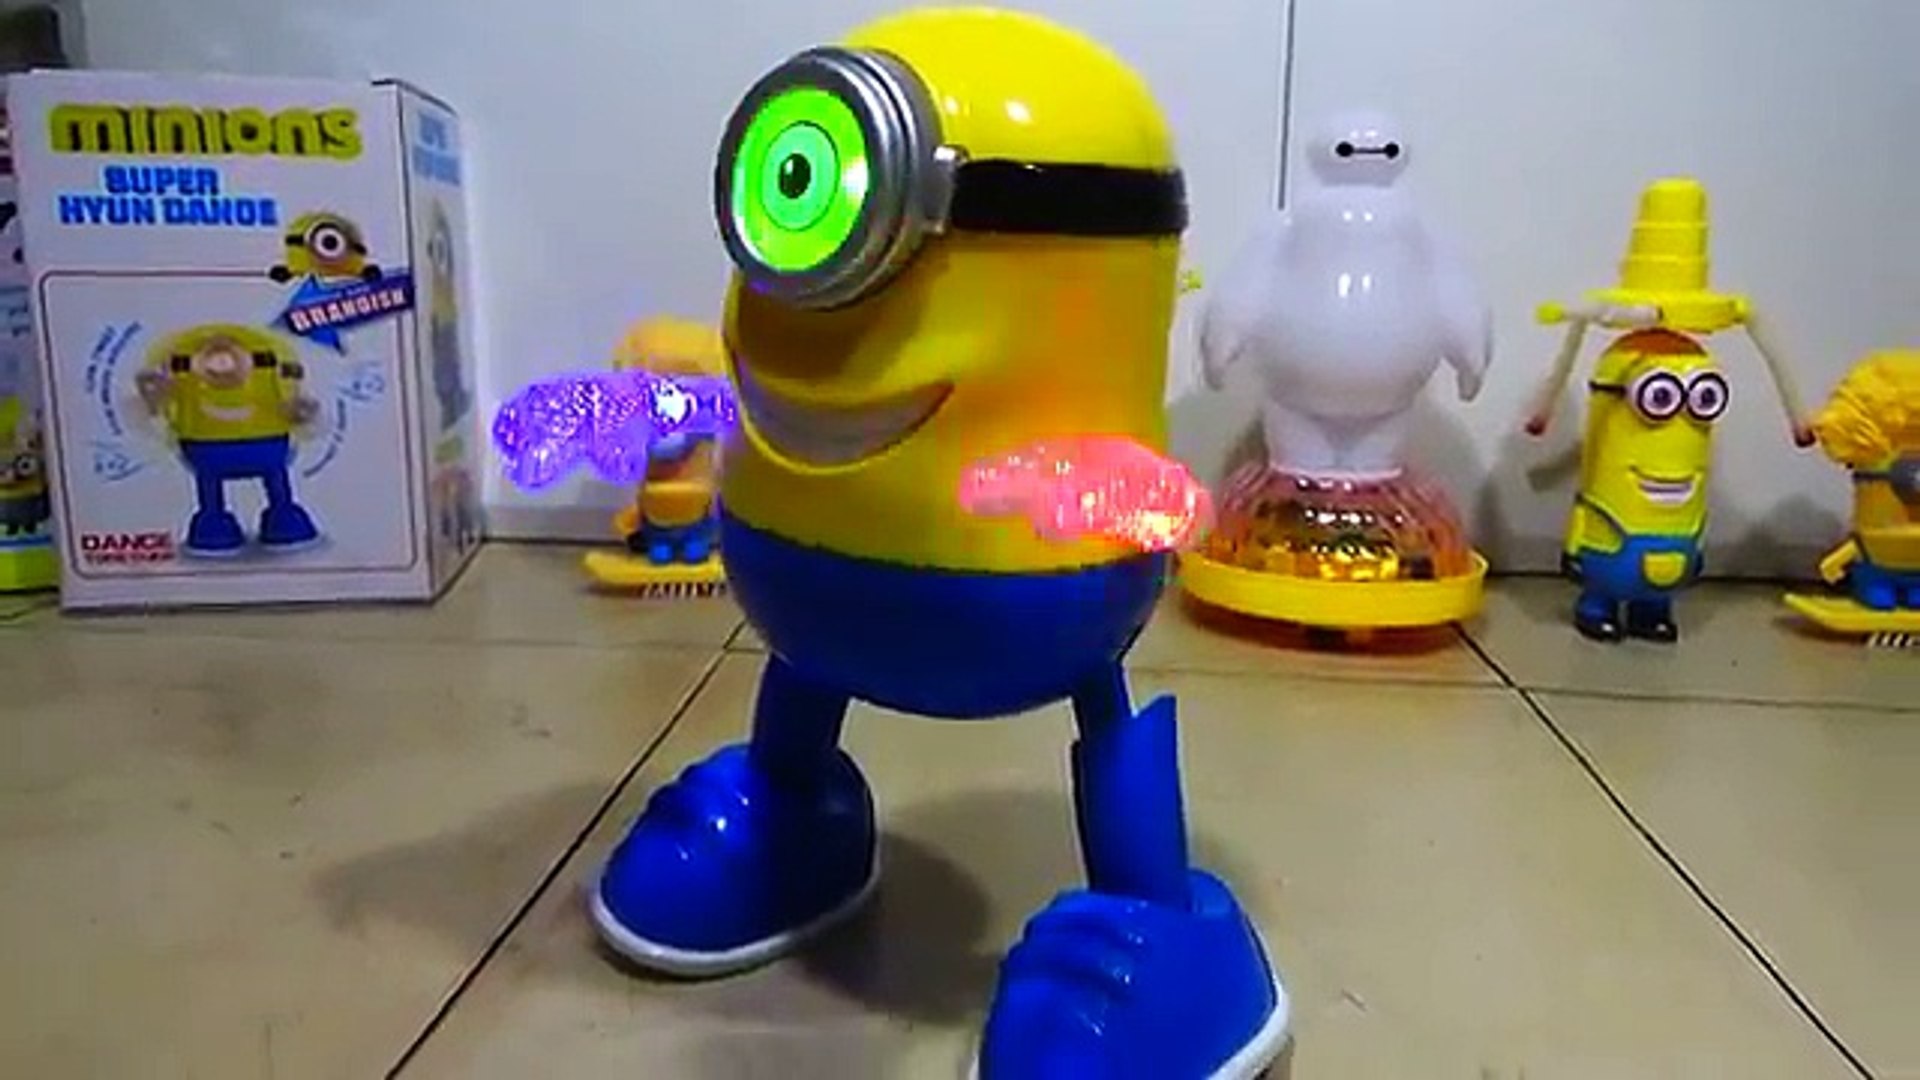 Dancing Minion Toy w/ Flashing Lights! Amazing Battery Operated Light Up Toy!  - 動画 Dailymotion